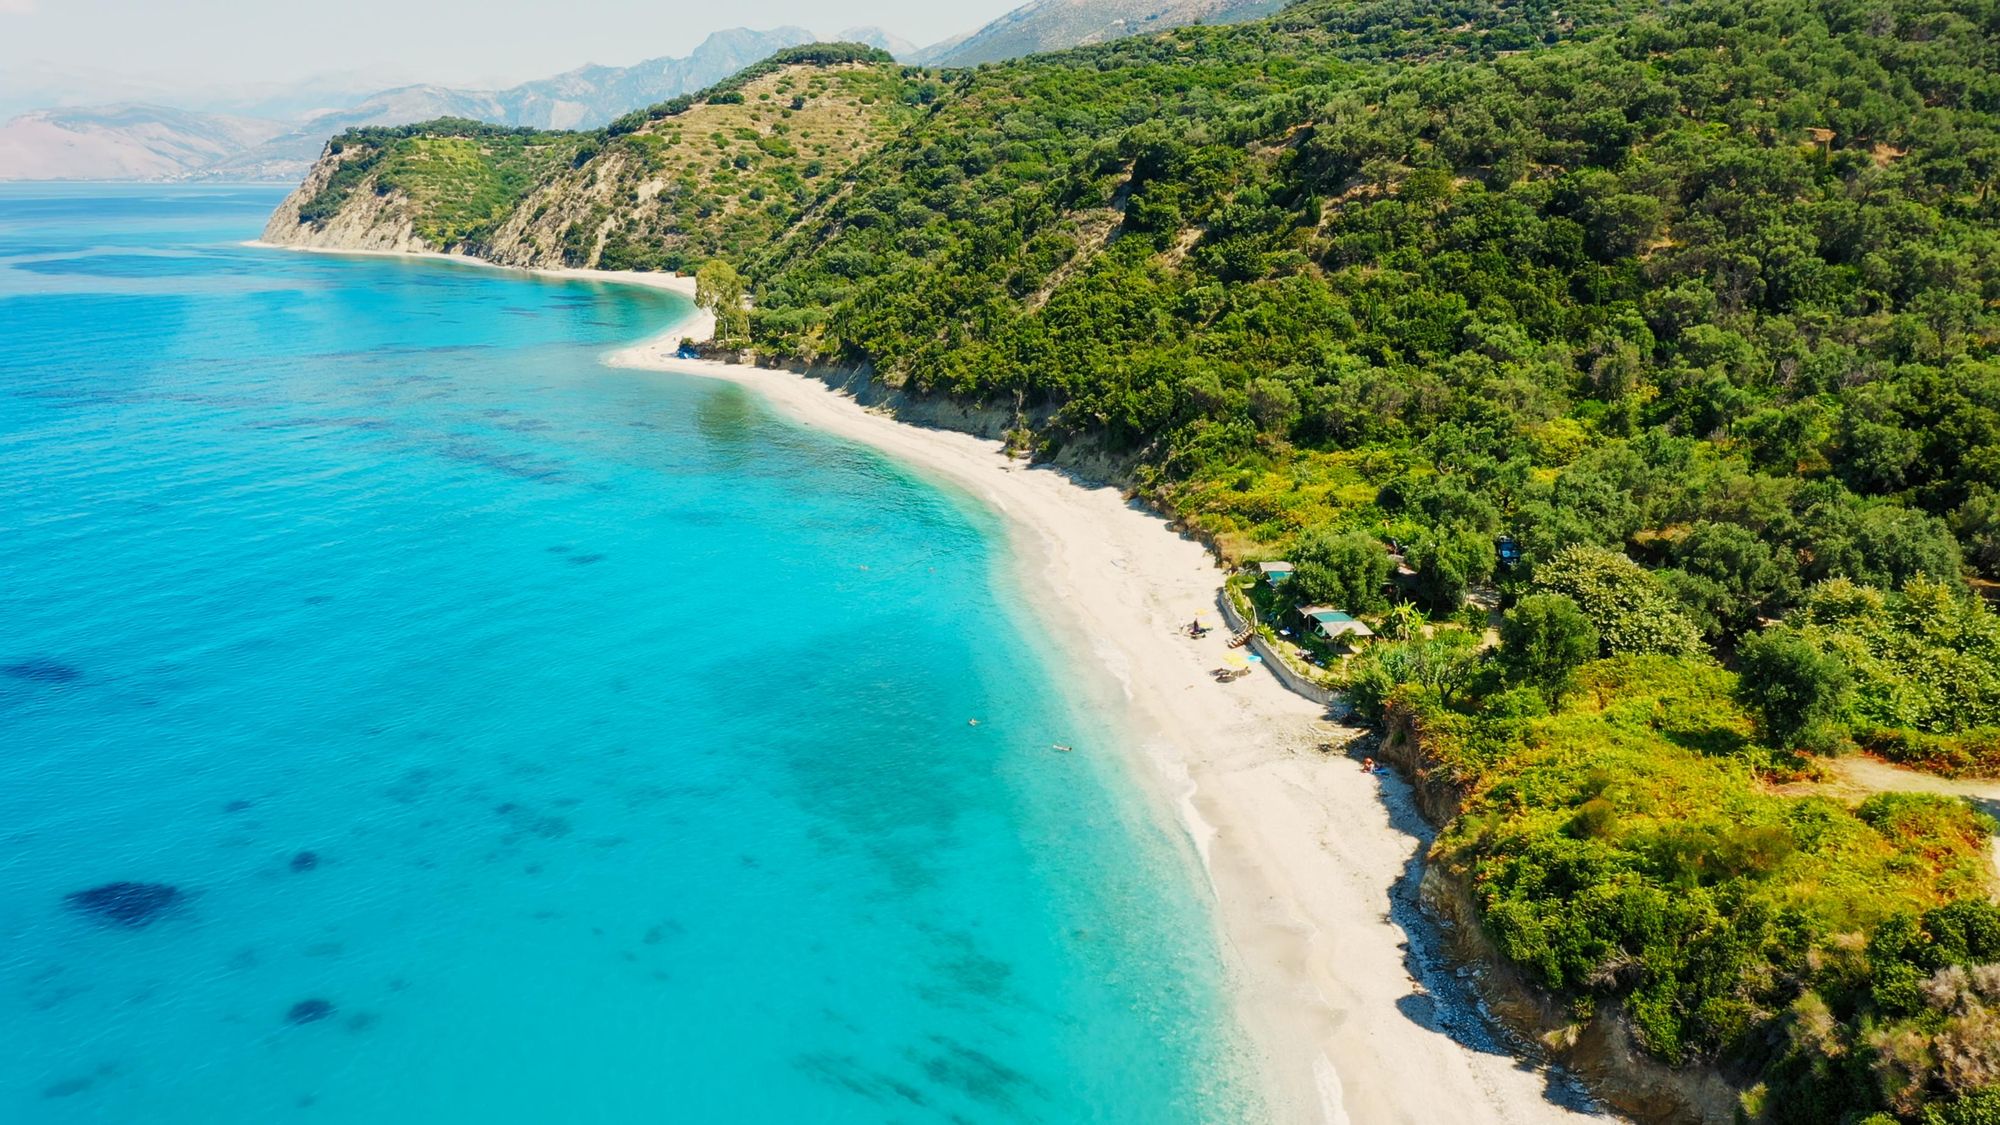 5 of the Best Hikes in Albania